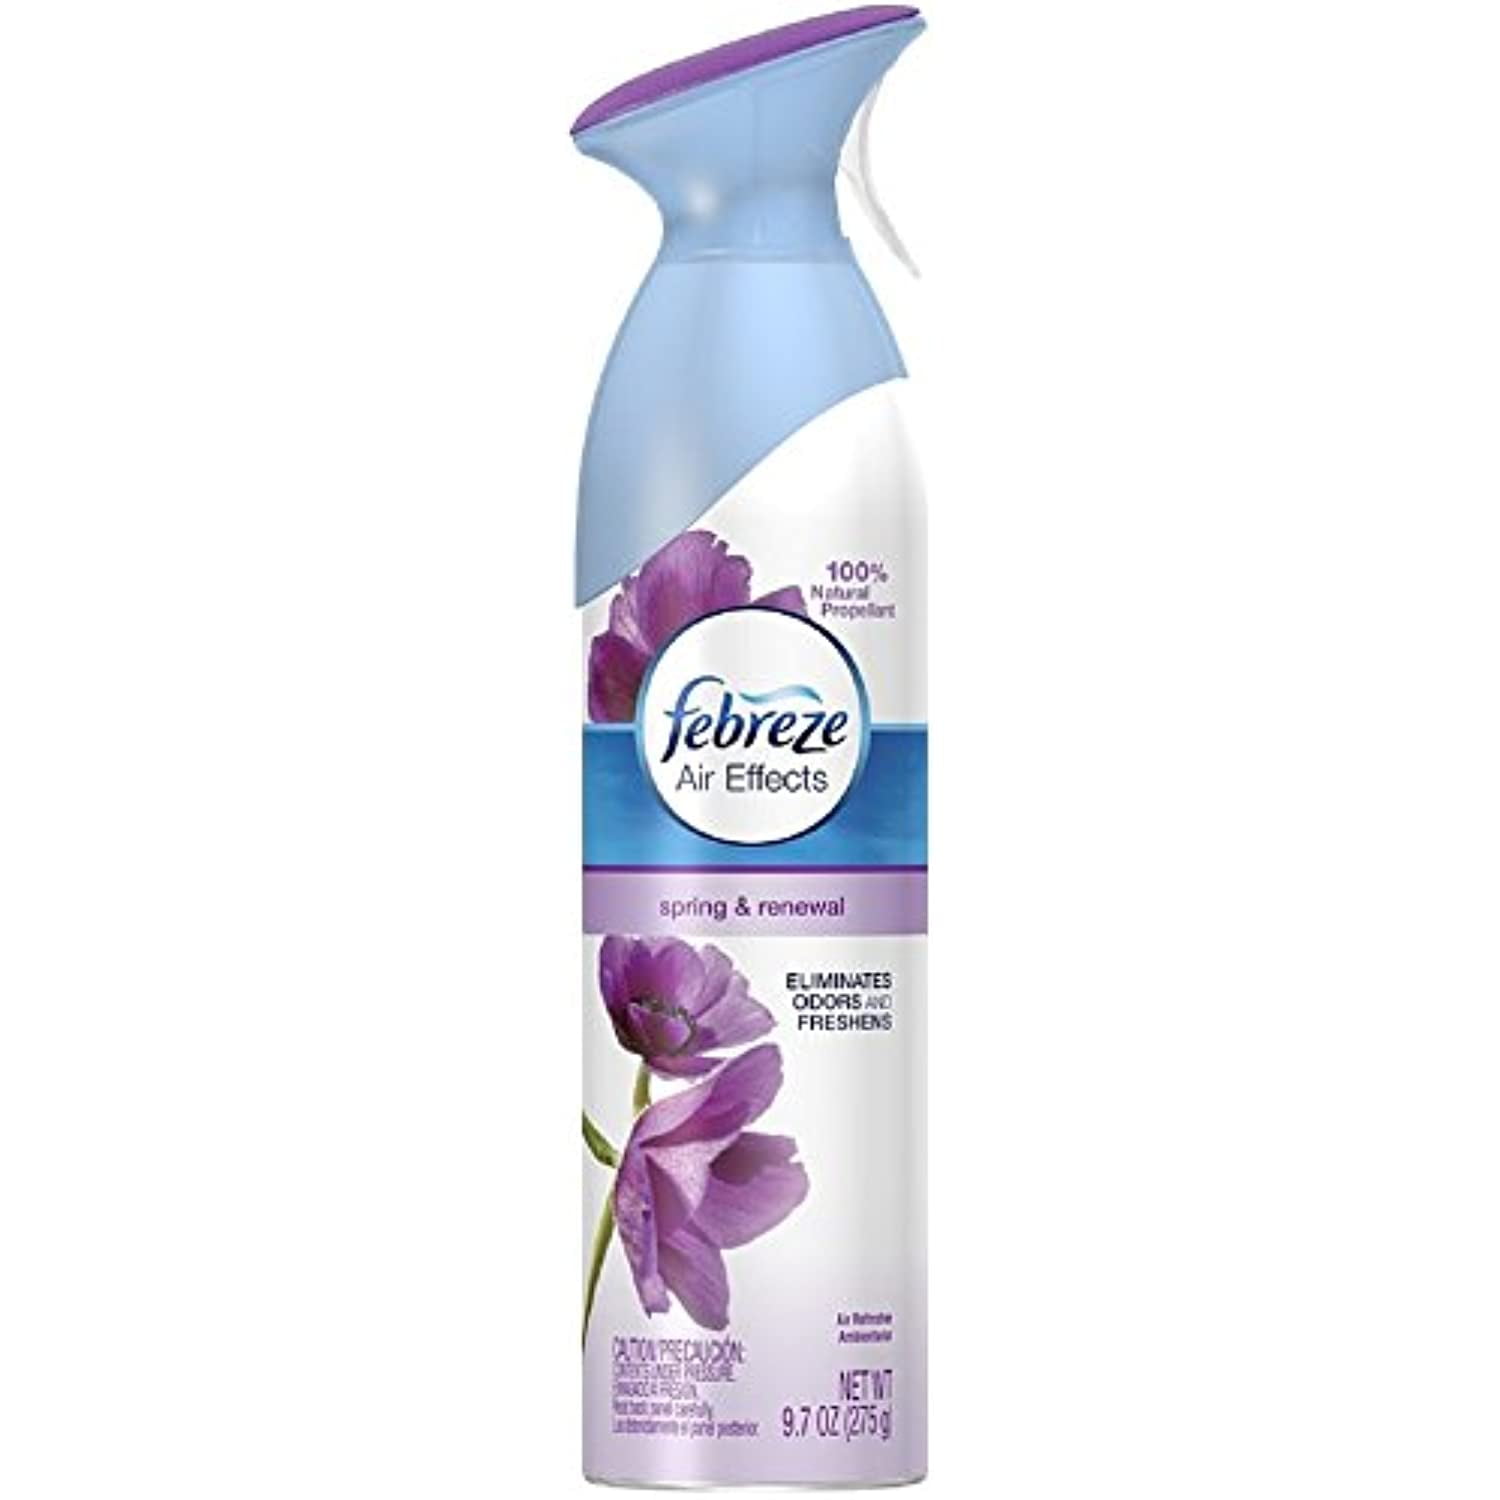 Febreze Air Effects Air Refresher, Spring & Renewal 9.70 Oz (Pack Of 11) 